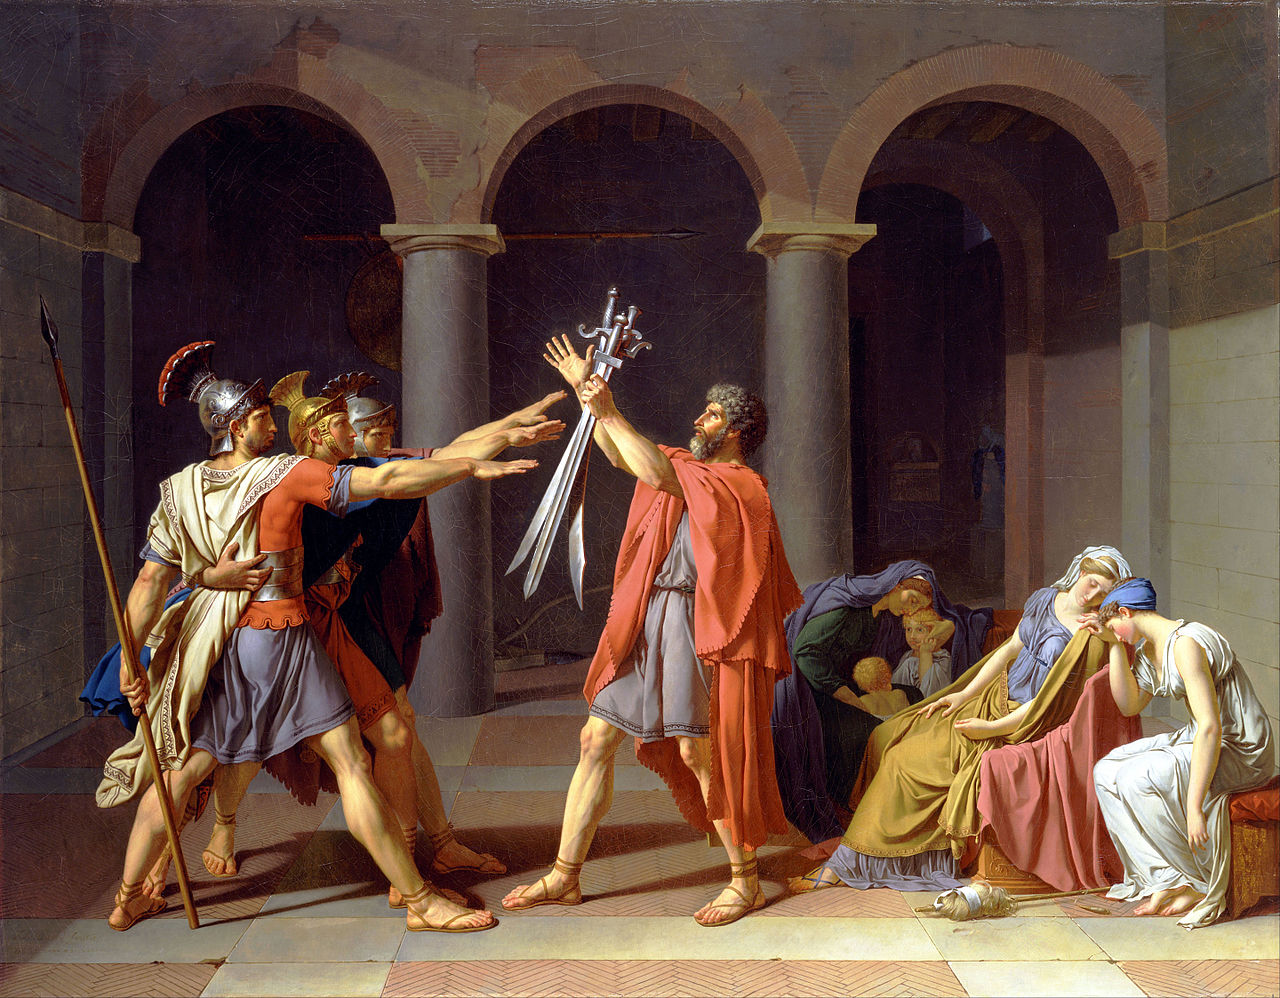 1280px-Jacques-Louis_David_-_Oath_of_the_Horatii_-_Google_Art_Project.jpg